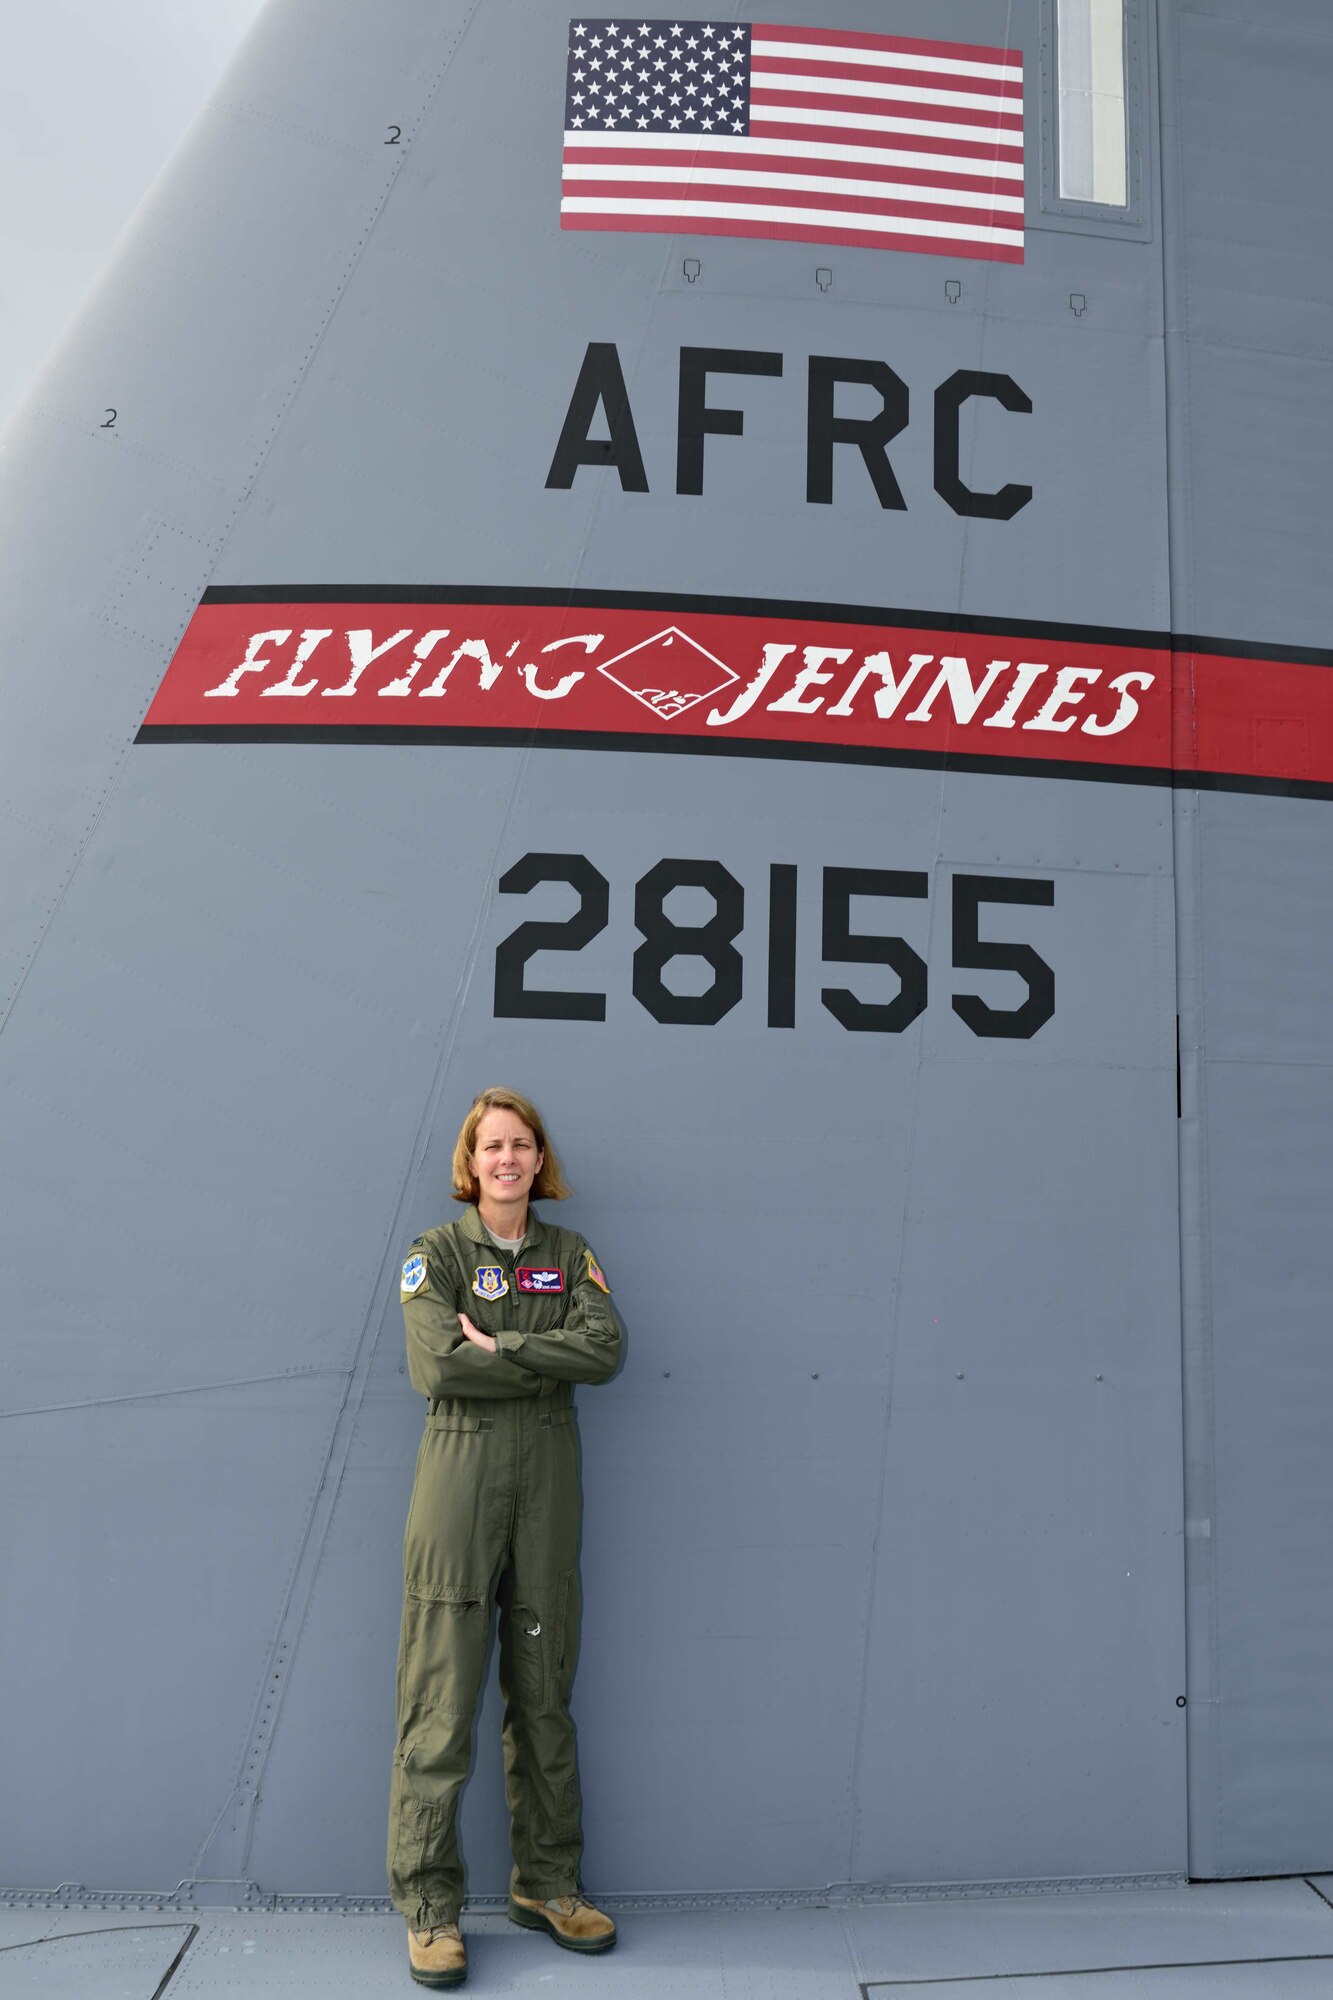 Col. Jennie R. Johnson, 403rd Wing Commander poses for a photo on the wing of a C-130J Super Hercules Aircraft Oct. 15, 2017 at Keesler Air Force Base, Mississippi (U.S. Air Force photo by Tech. Sgt. Ryan Labadens)